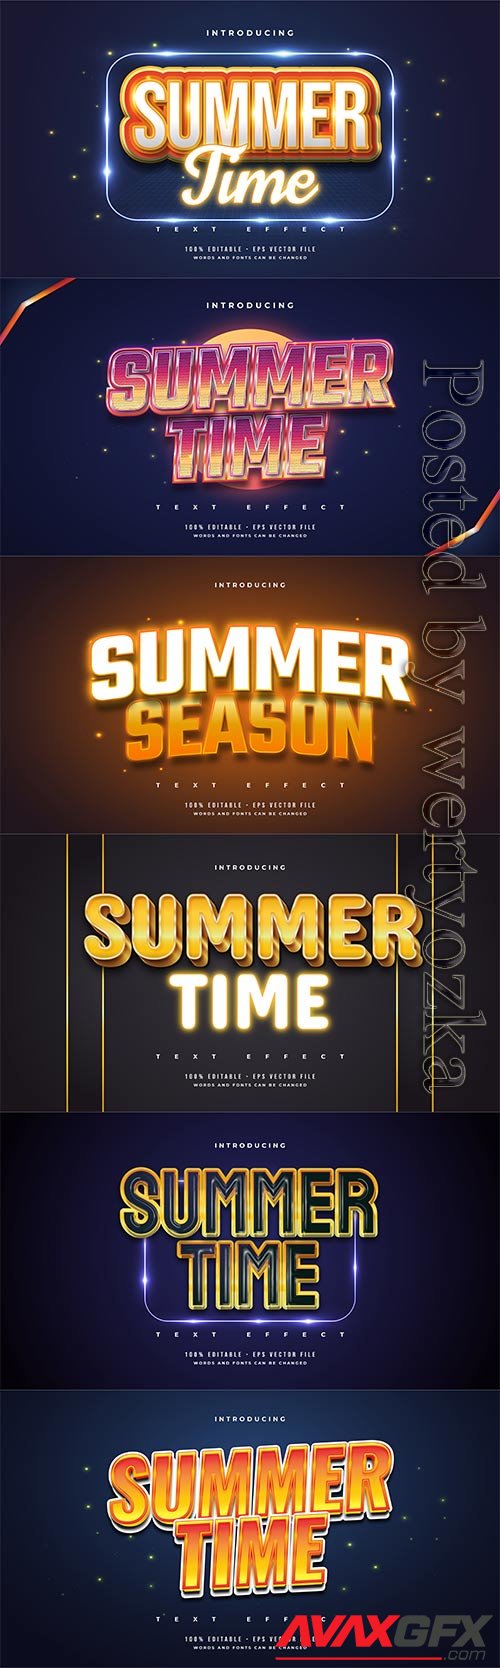 Summer time text in colorful retro style and glowing neon effect